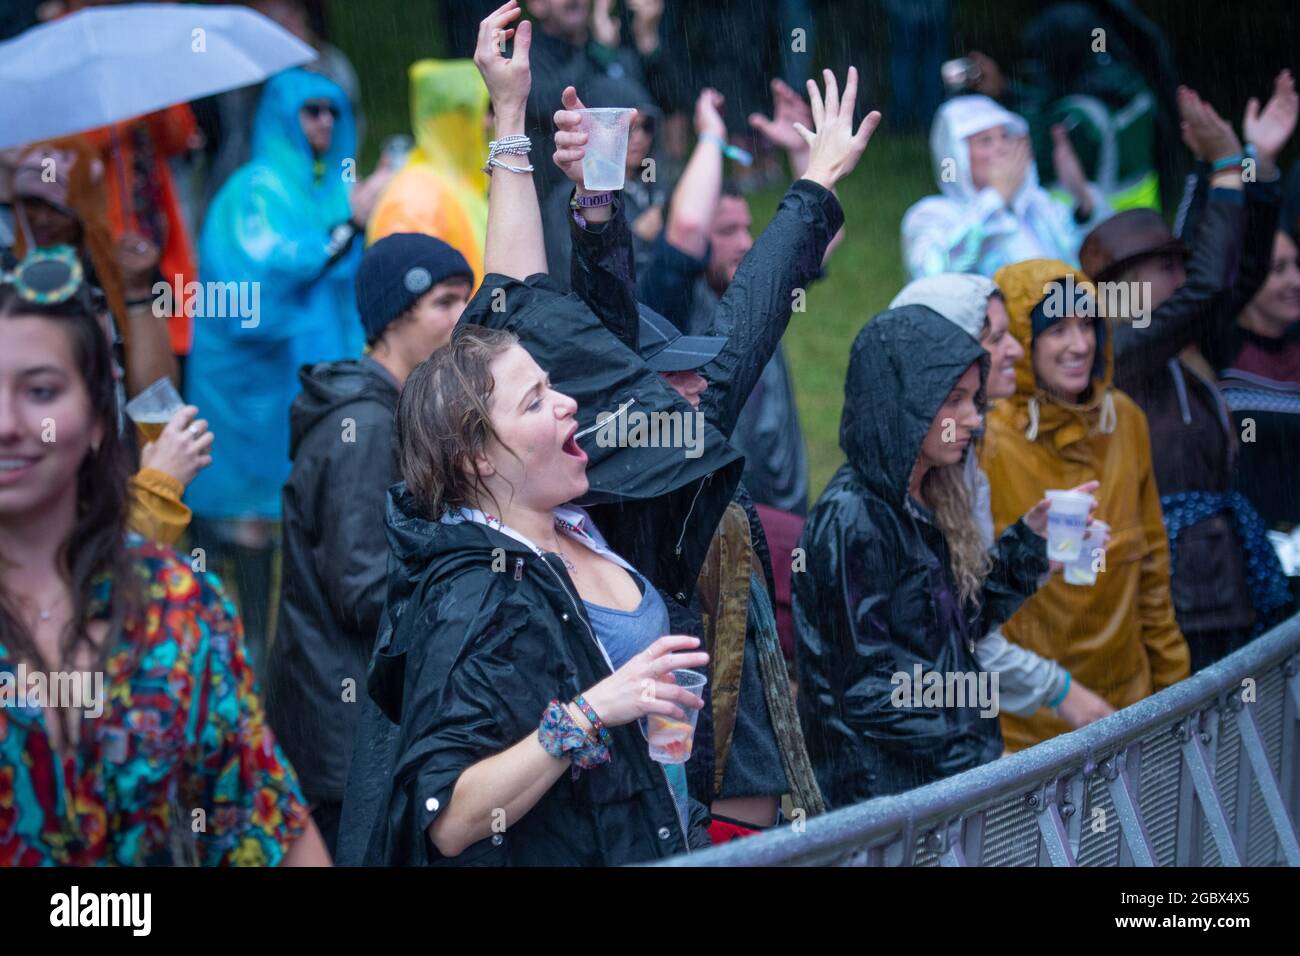 Wilderness Festival, Oxfordshire, UK. 5th Aug, 2021. Revellers enjoy Wilderness Festival despite the rain as the event starts its 10th year. It was postponed in 2020 due to Covid, but has been able to go ahead in 2021 with strict testing in place. Credit: Andrew Walmsley/Alamy Live News Stock Photo